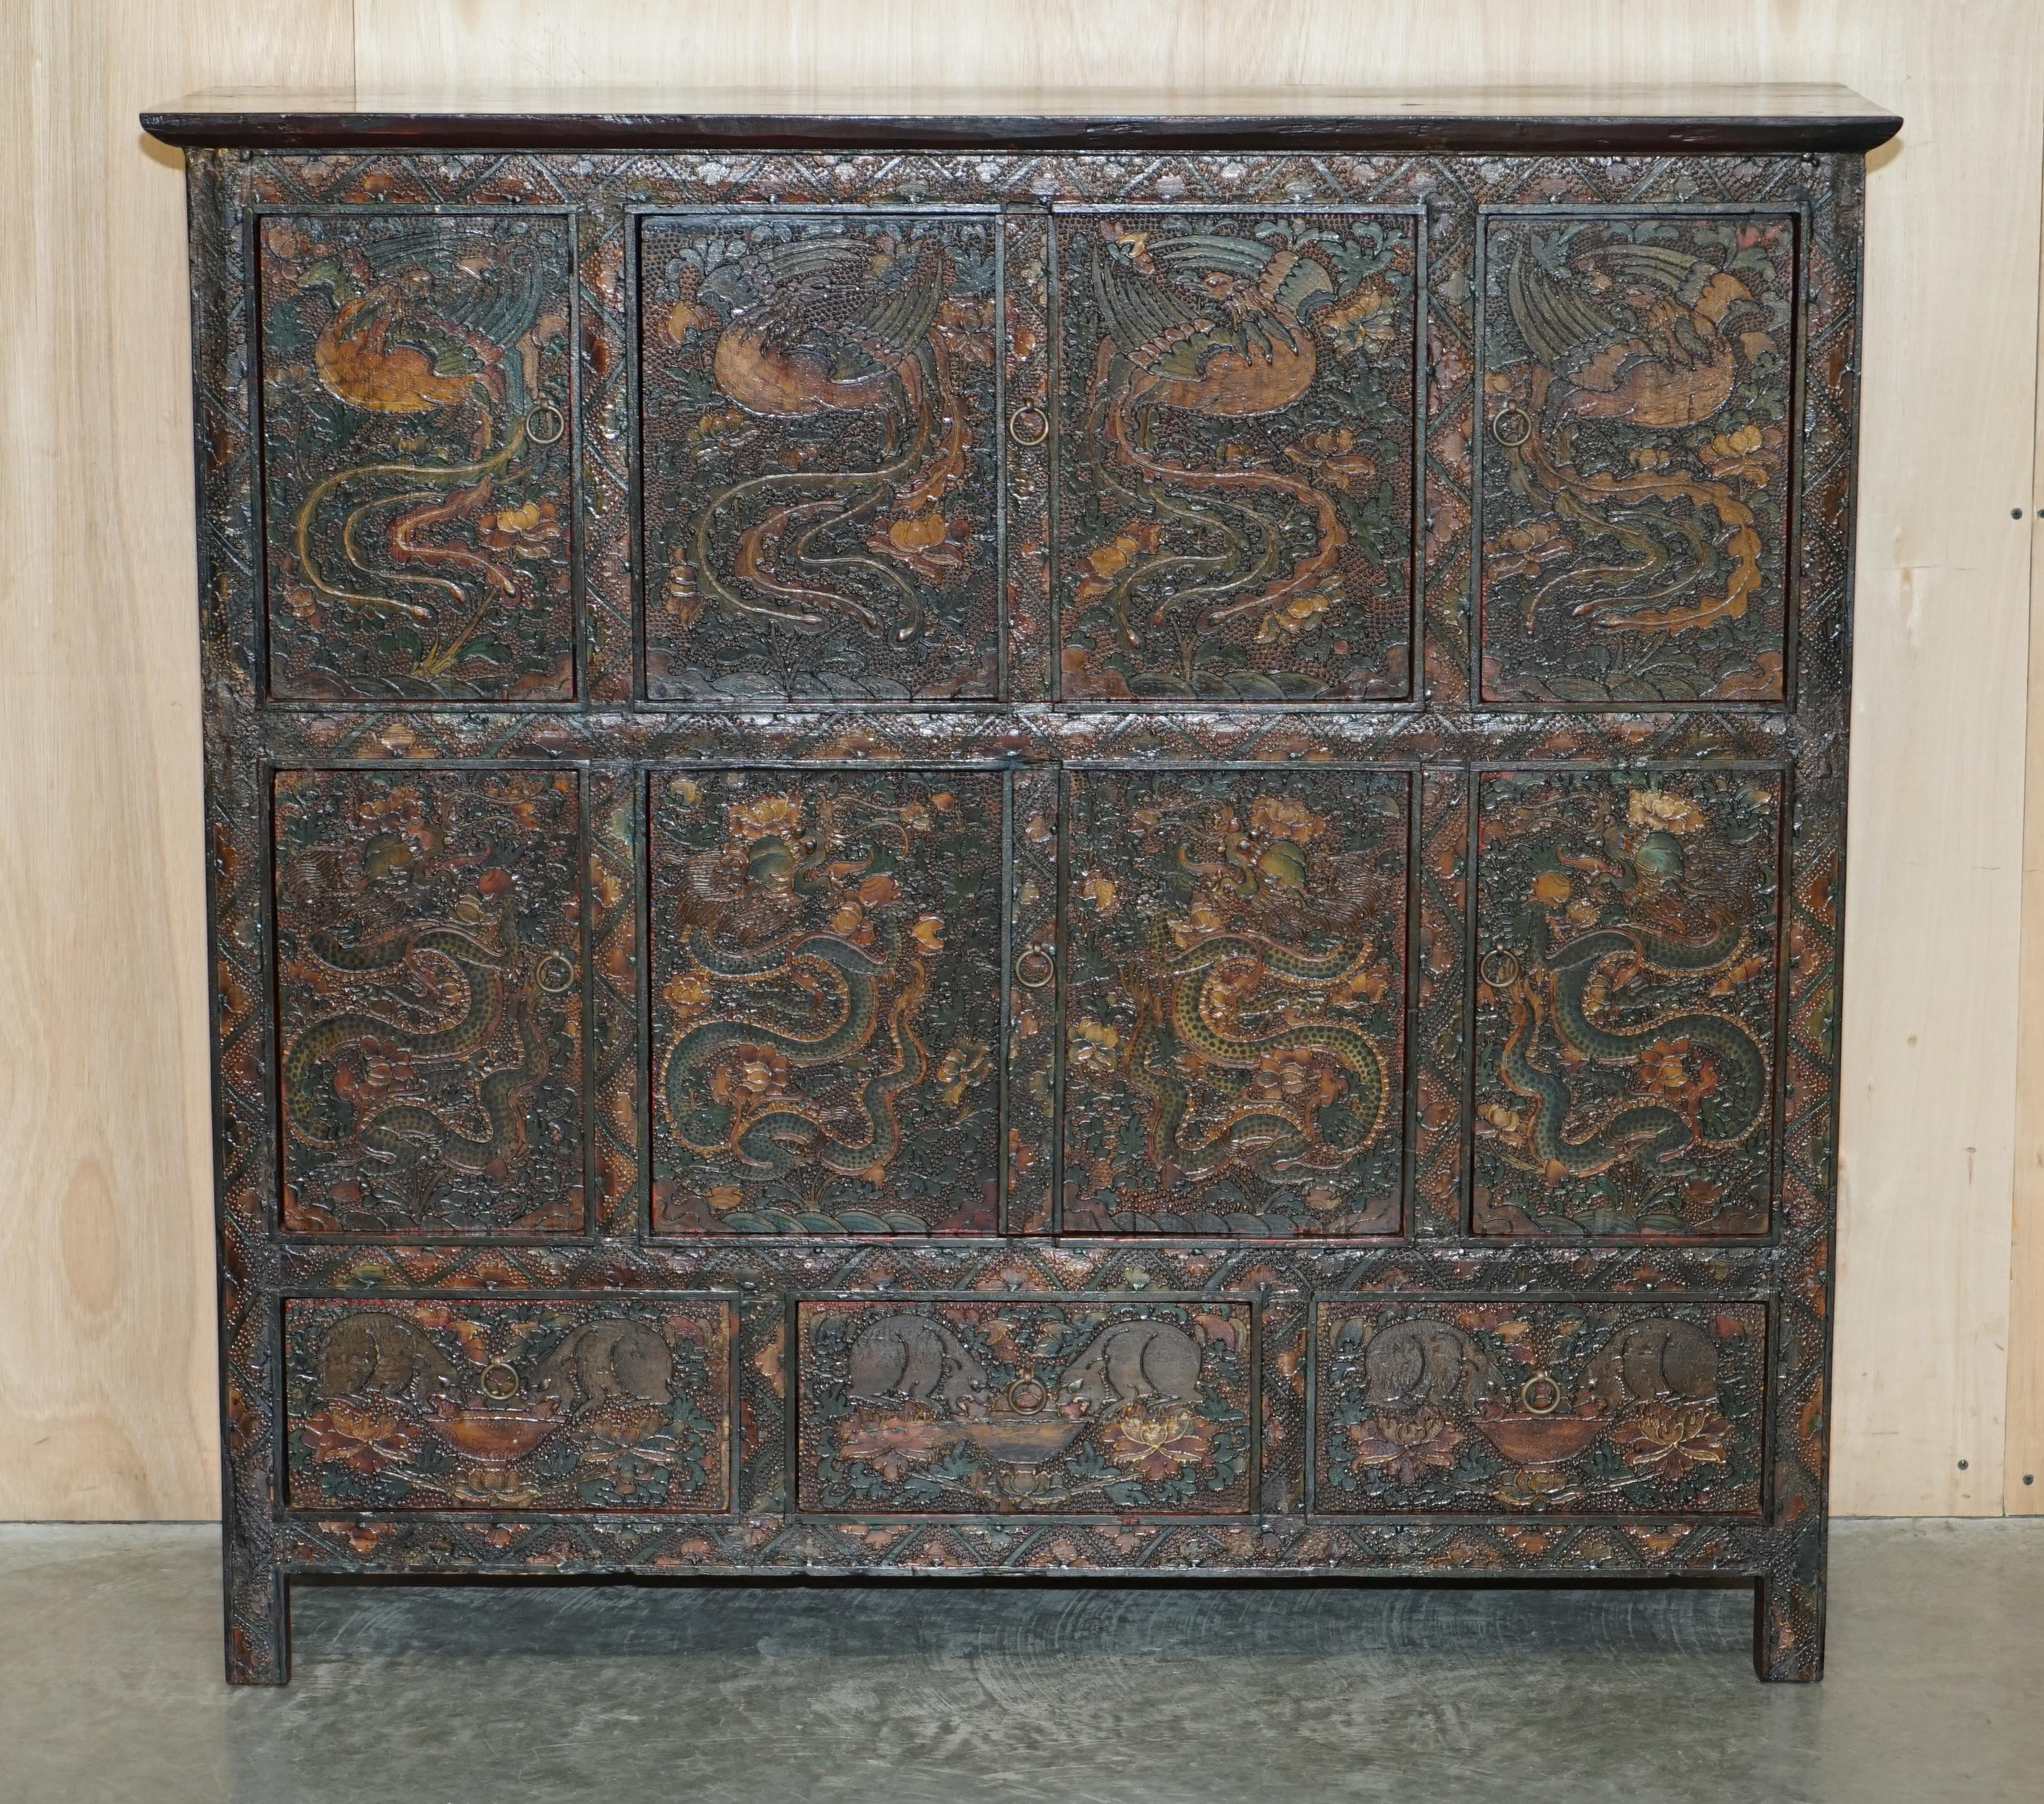 We are delighted to offer for sale this absolutely stunning, highly decorative, Antique Tibetan, Polychrome painted Altar cabinet with drawers depicting dragons

This is a very good looking and well made piece of art furniture. It is the best kind